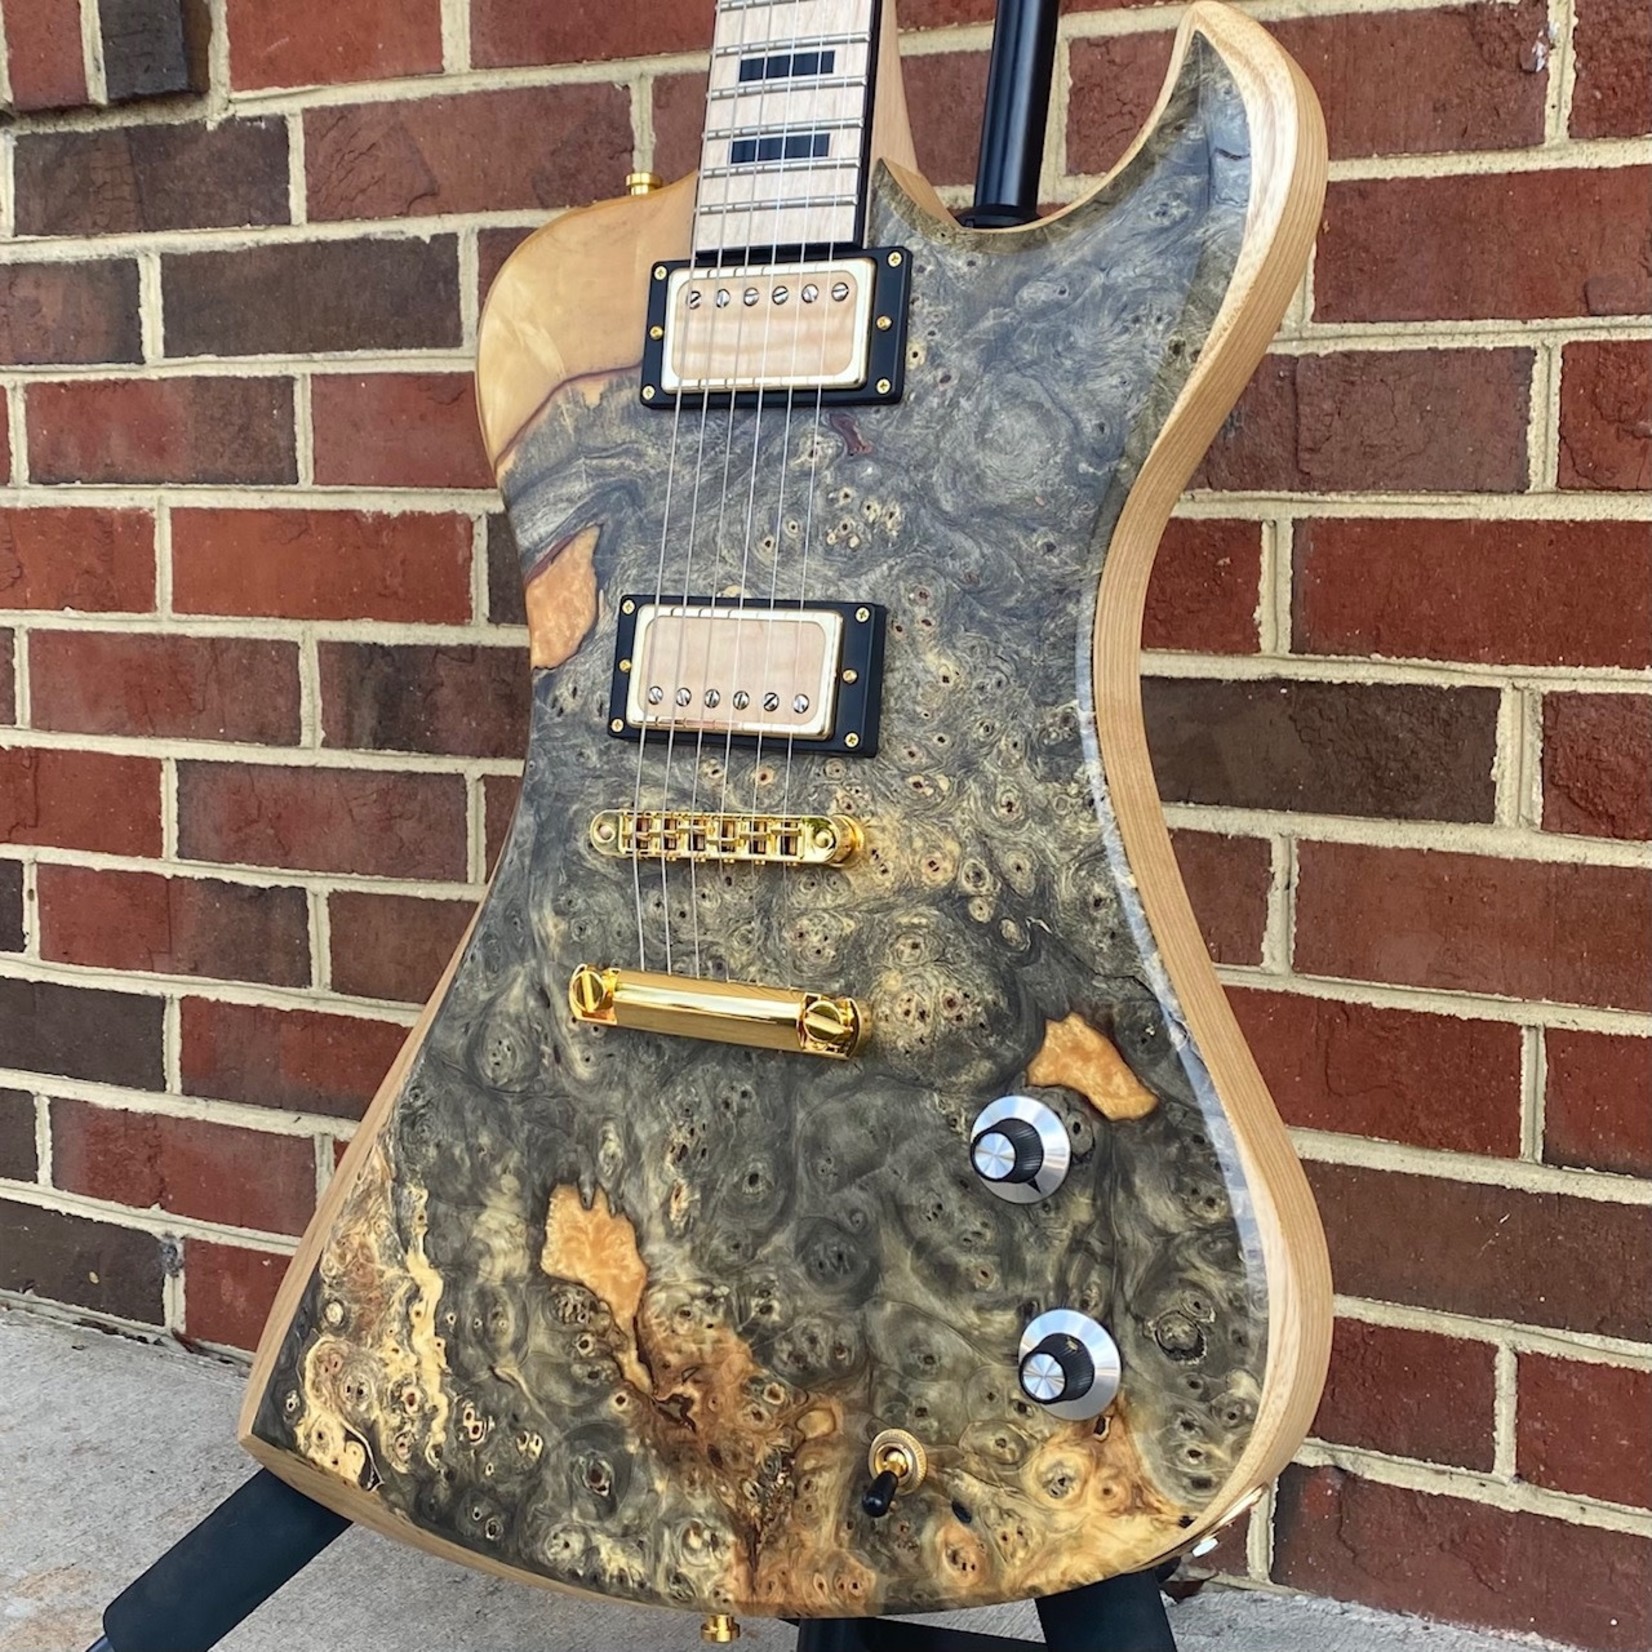 Dunable Guitars Dunable Guitars USA Special Stash #2 - R2, One Piece Buckeye Burl Top w/ Gold Sparkle Resin Fill, Swamp Ash Body, Maple Neck, Maple Fretboard, Block Inlays, Gold Hardware, Locking Tuners, Hardshell Case